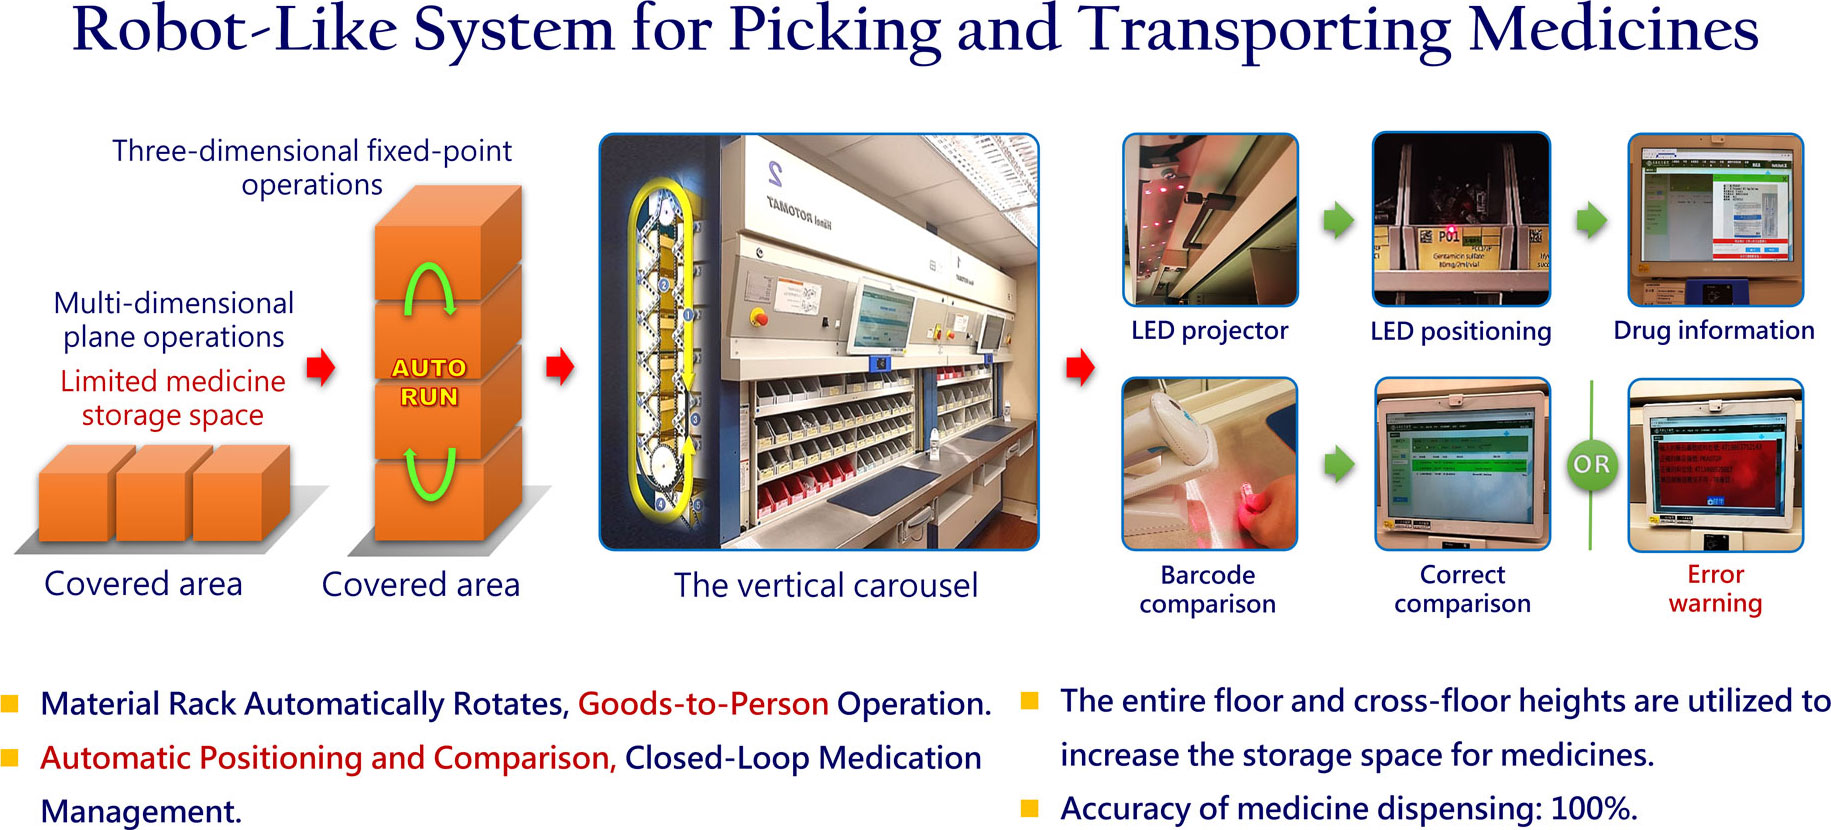 Robot-Like System for Picking and Transporting Medicines